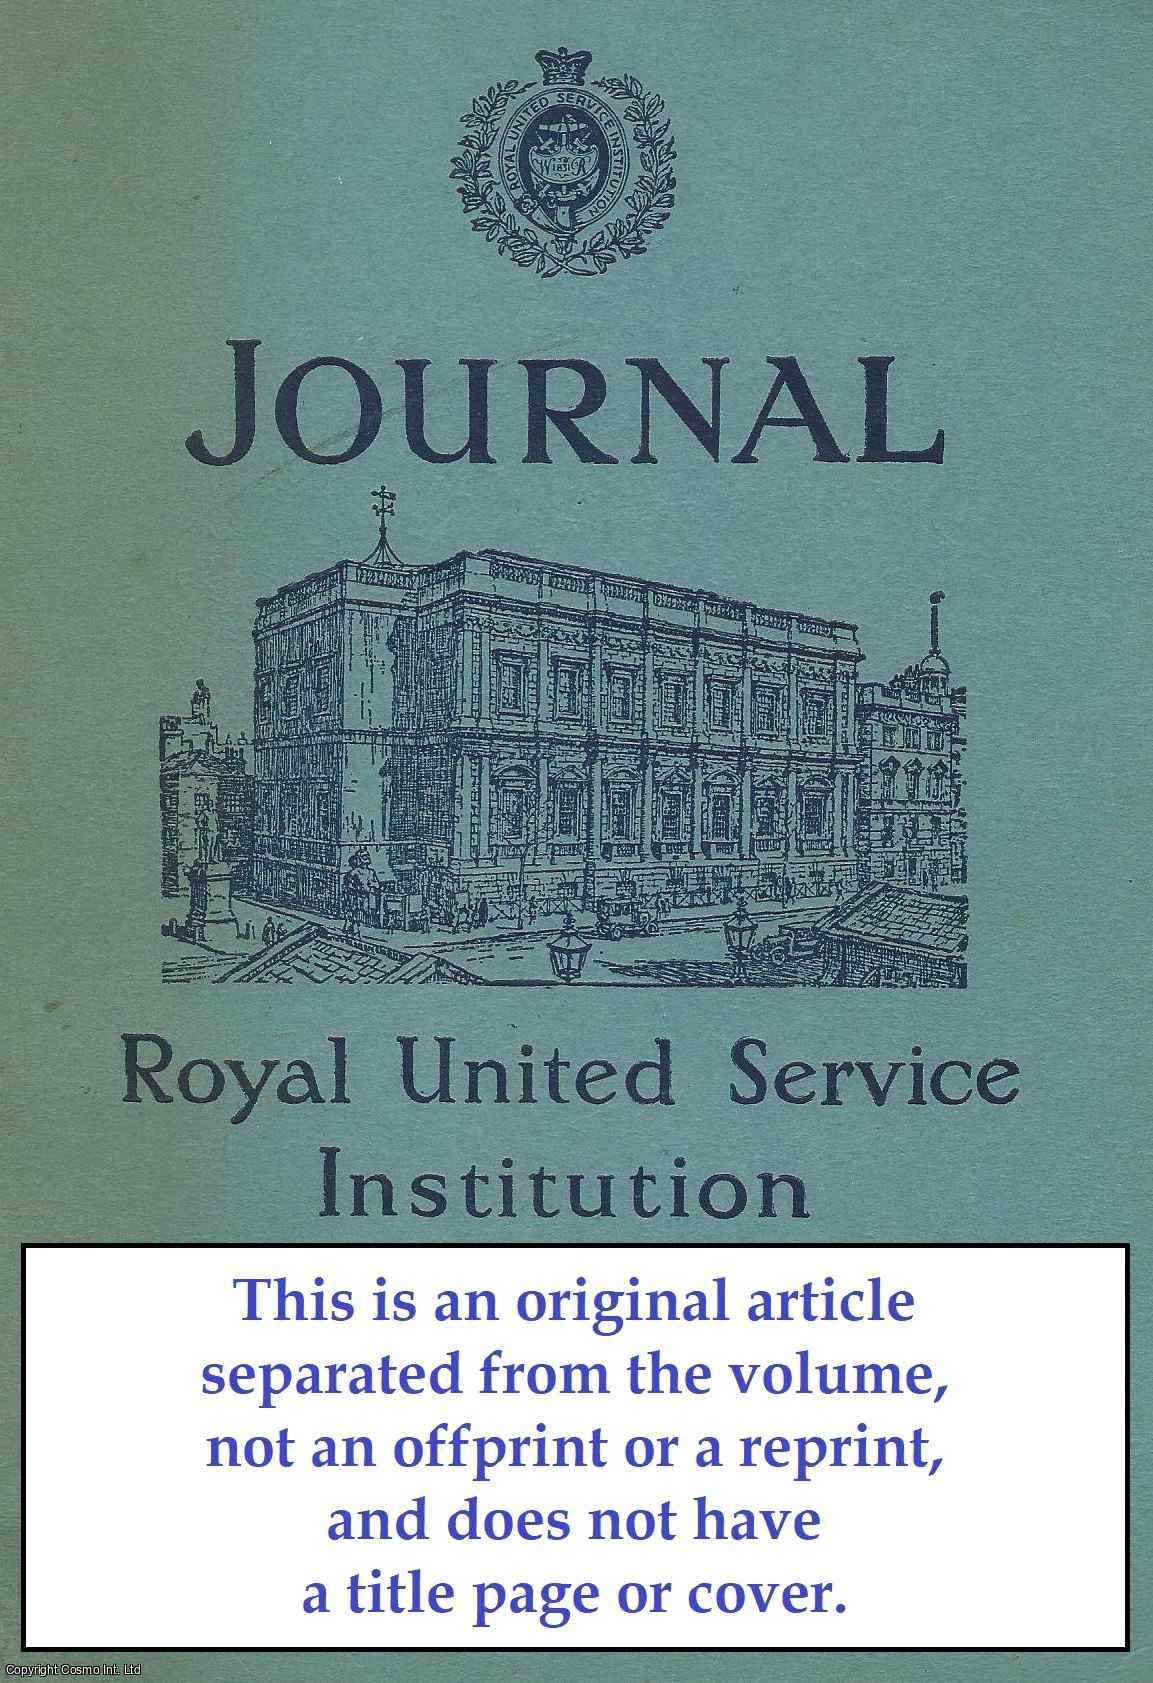 Tom Pocock - Defence and Public Relations. An original article from The Royal United Service Institution Journal, 1969.